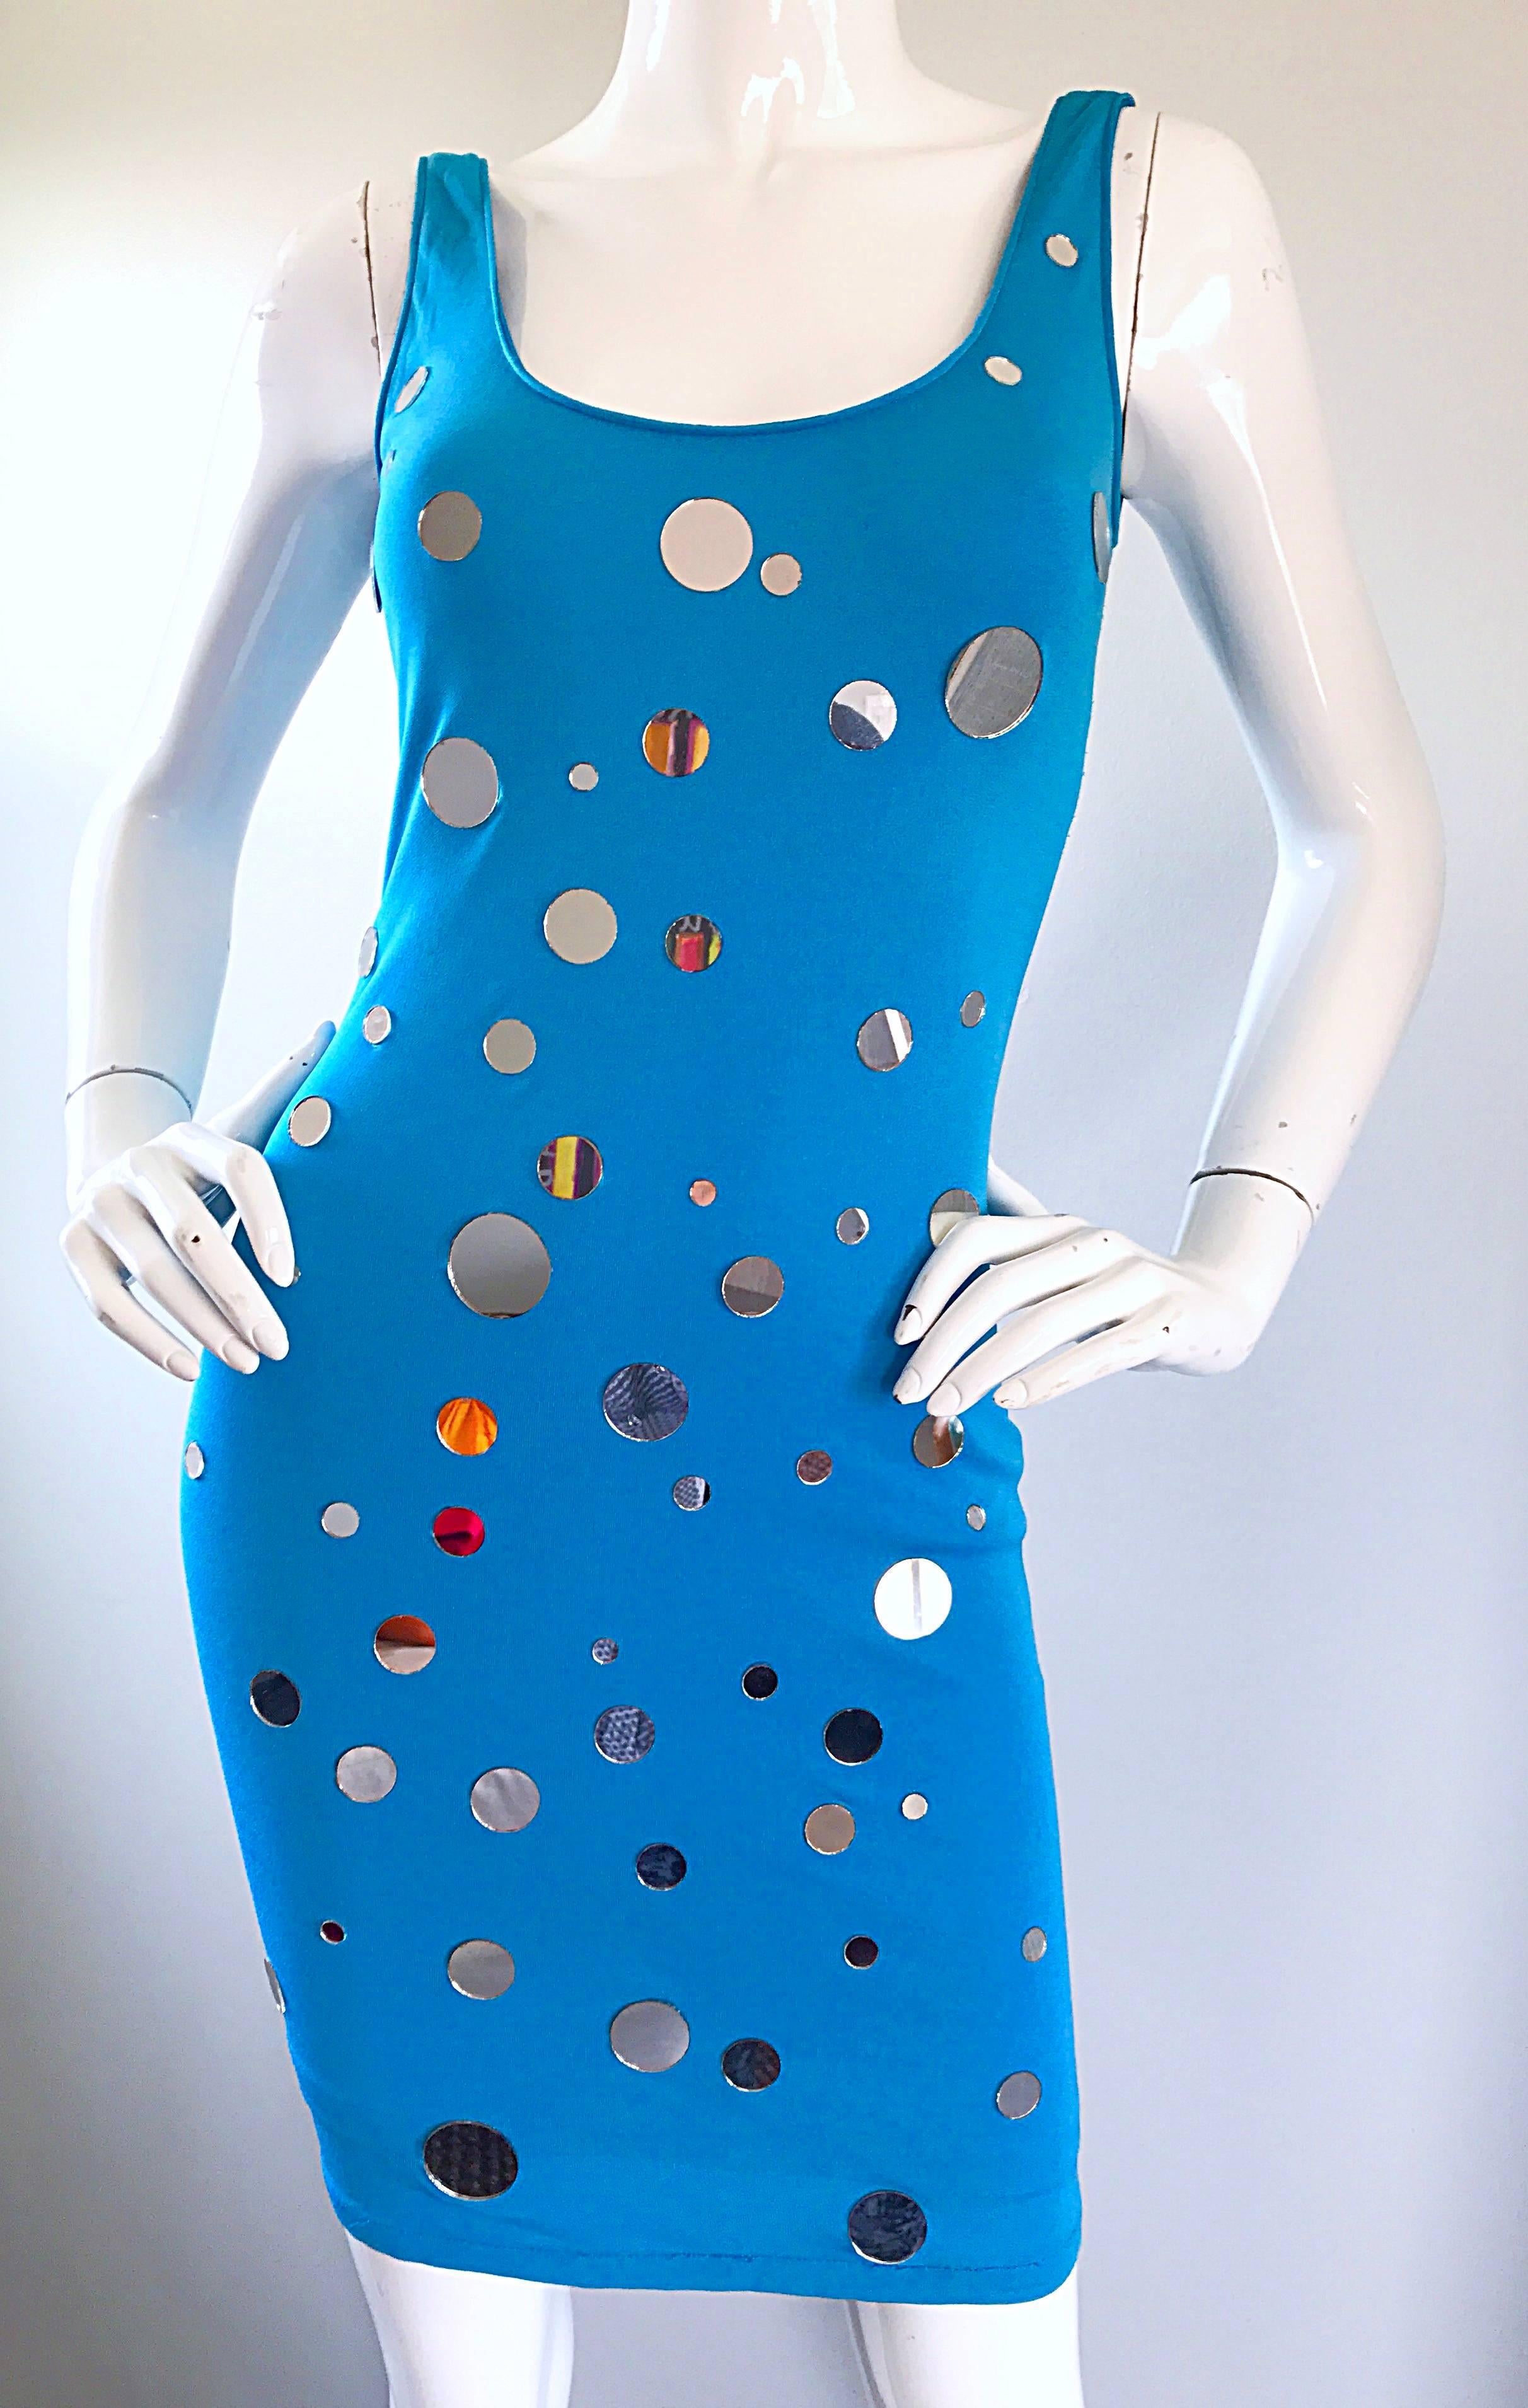 Documented C.D. Greene Turquoise Teal Blue Vintage Mirrored Bodycon Beaded Dress 3